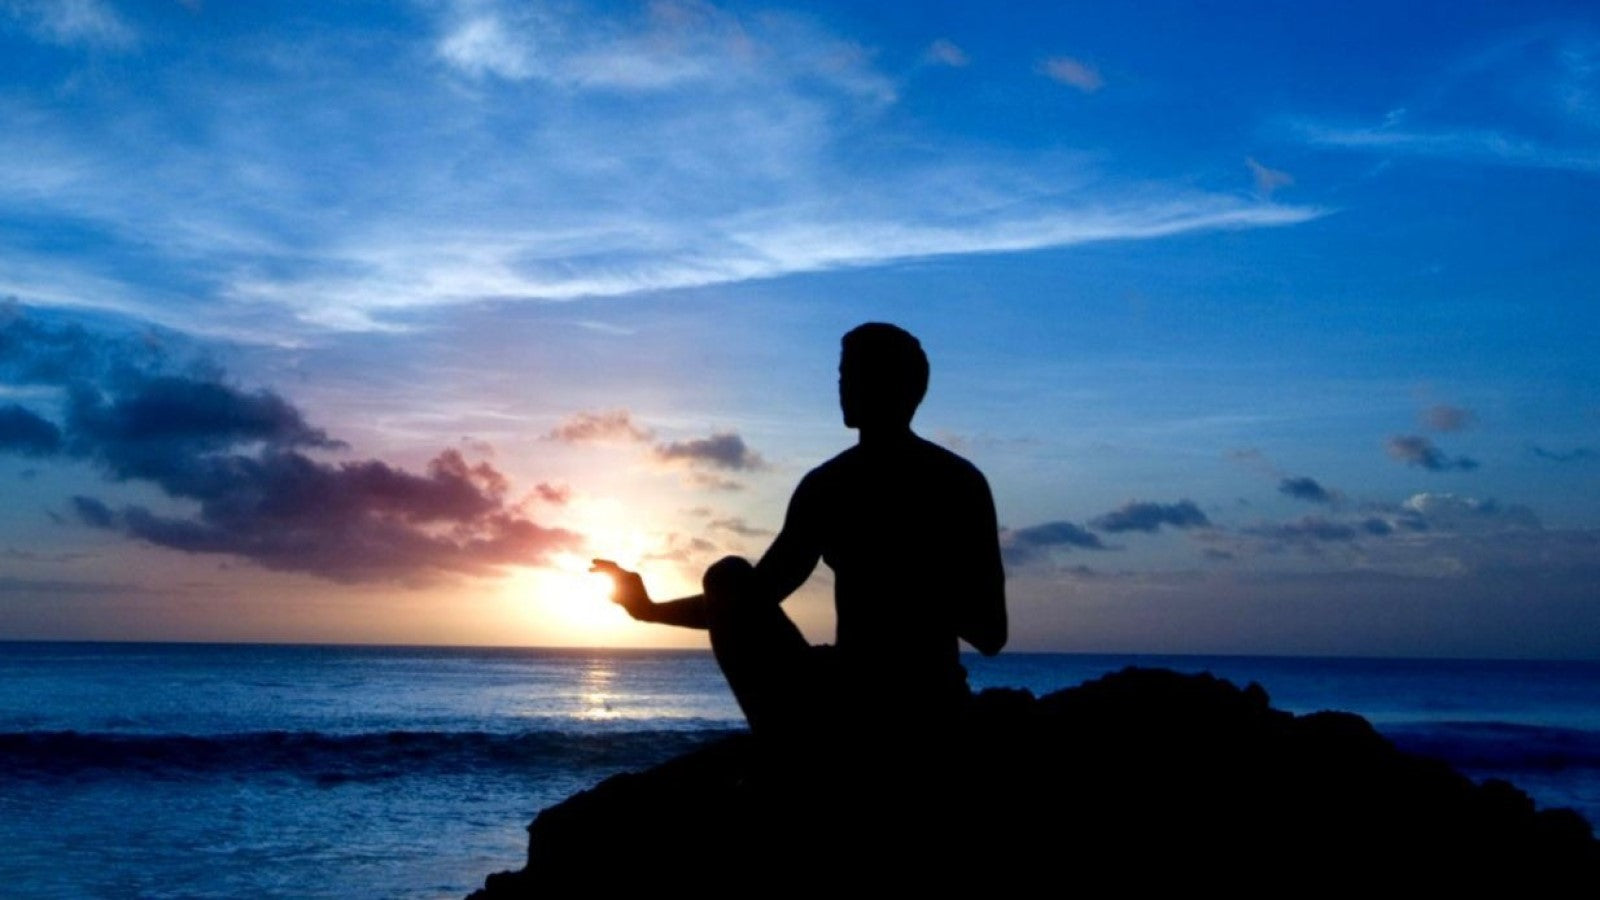 Get More Out of Life by Finding Yourself Through Meditation